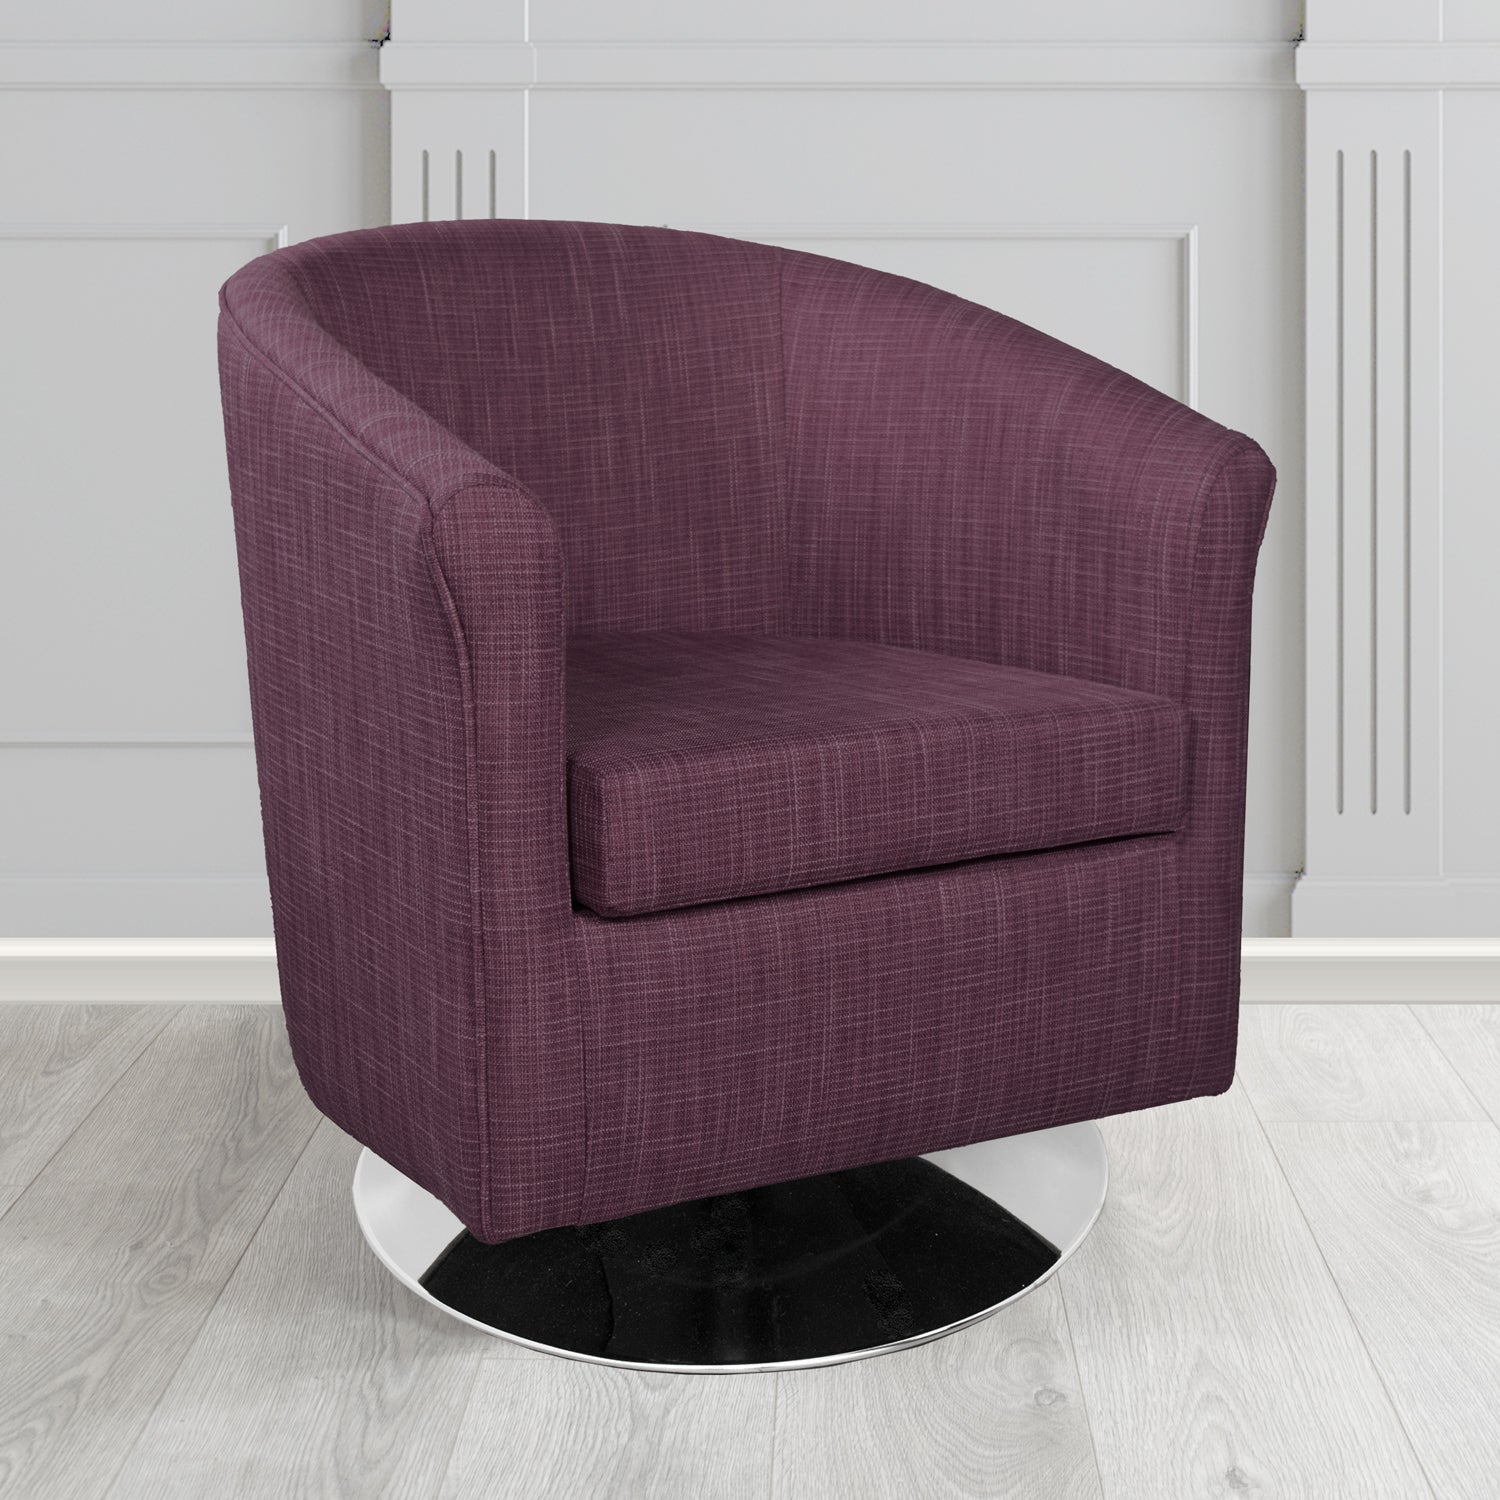 Tuscany Ravel Chianti Contract Crib 5 Fabric Swivel Tub Chair - Antimicrobial & Water-Resistant - The Tub Chair Shop